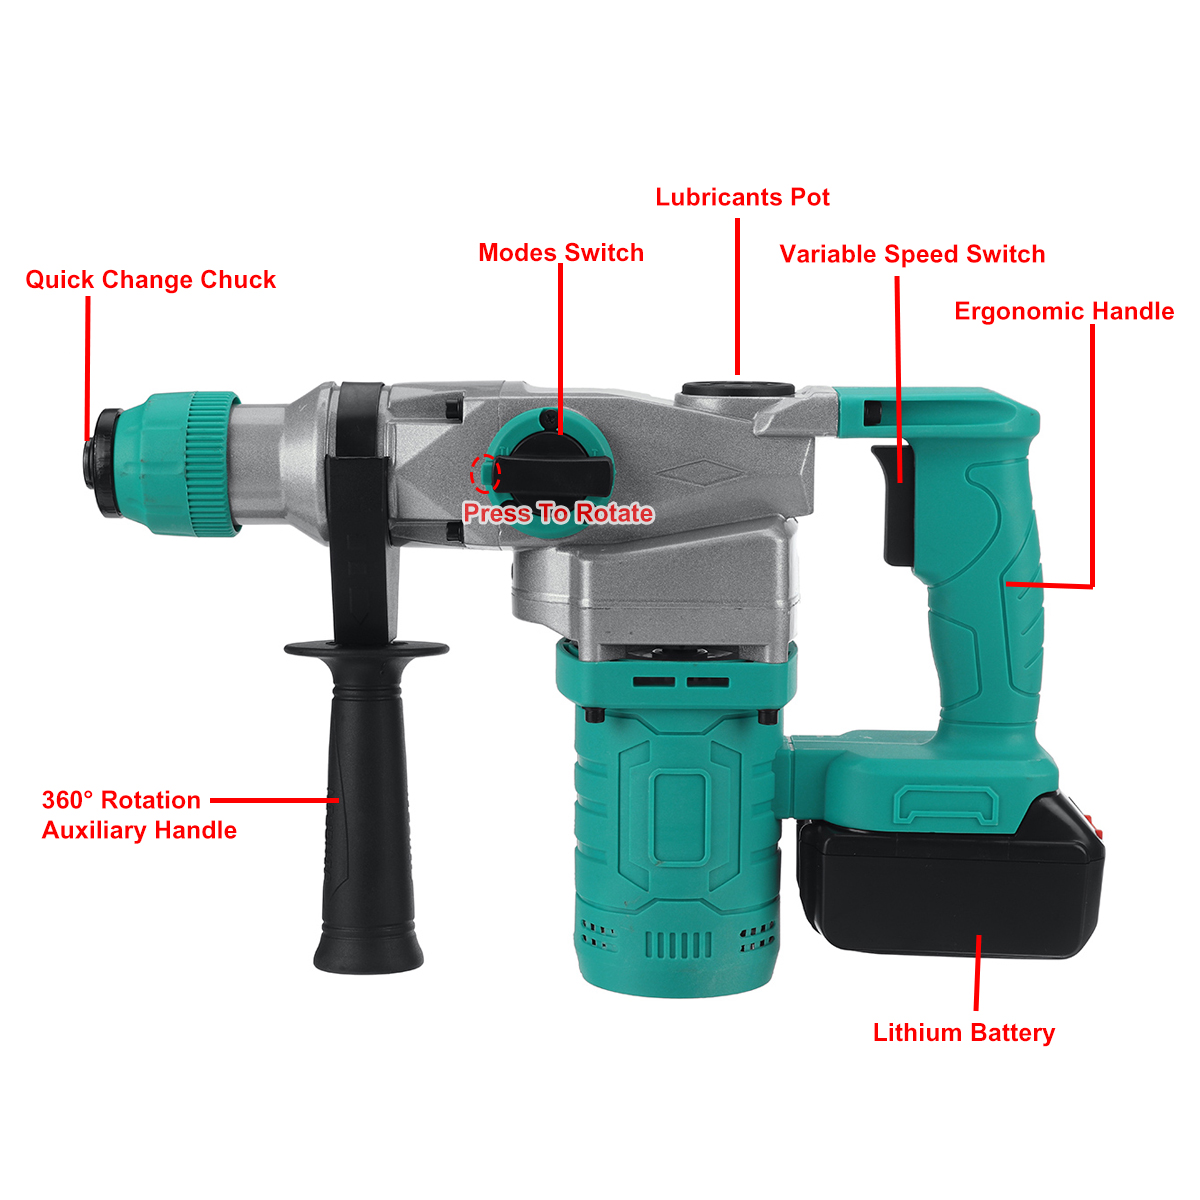 Brushless-Cordless-Electric-Hammer-Drill-Wood-Concrete-Wall-Drilling-Slotting-Tool-W-None-or-1pc-Bat-1878668-7